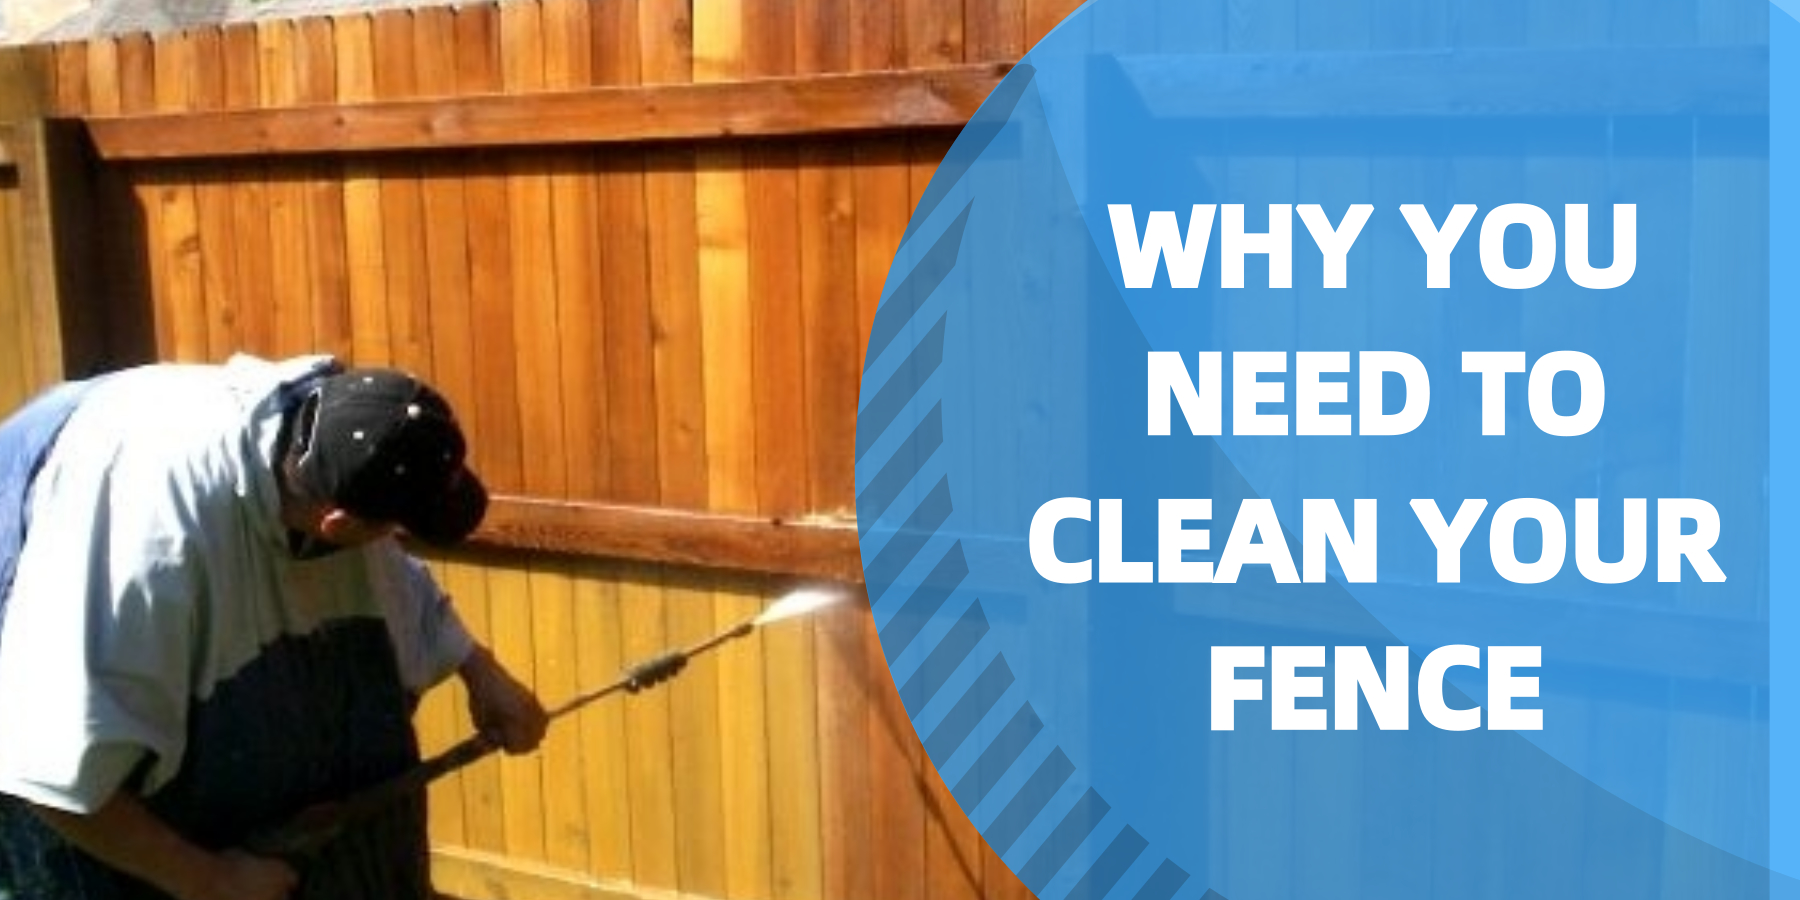 Learn more about why you need to clean your fence